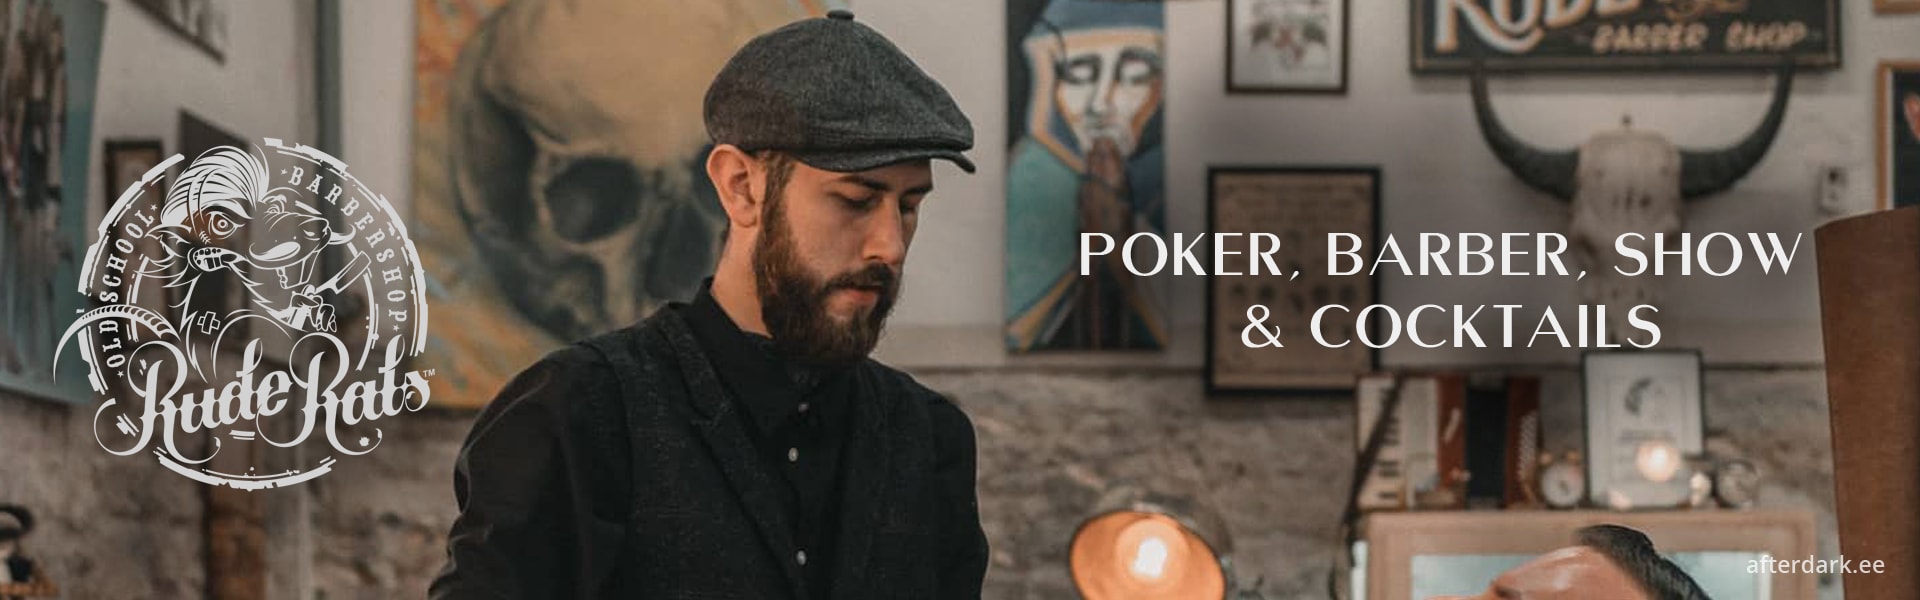 Bachelor Party with Poker, Barber, Show & Cocktails in Tallinn